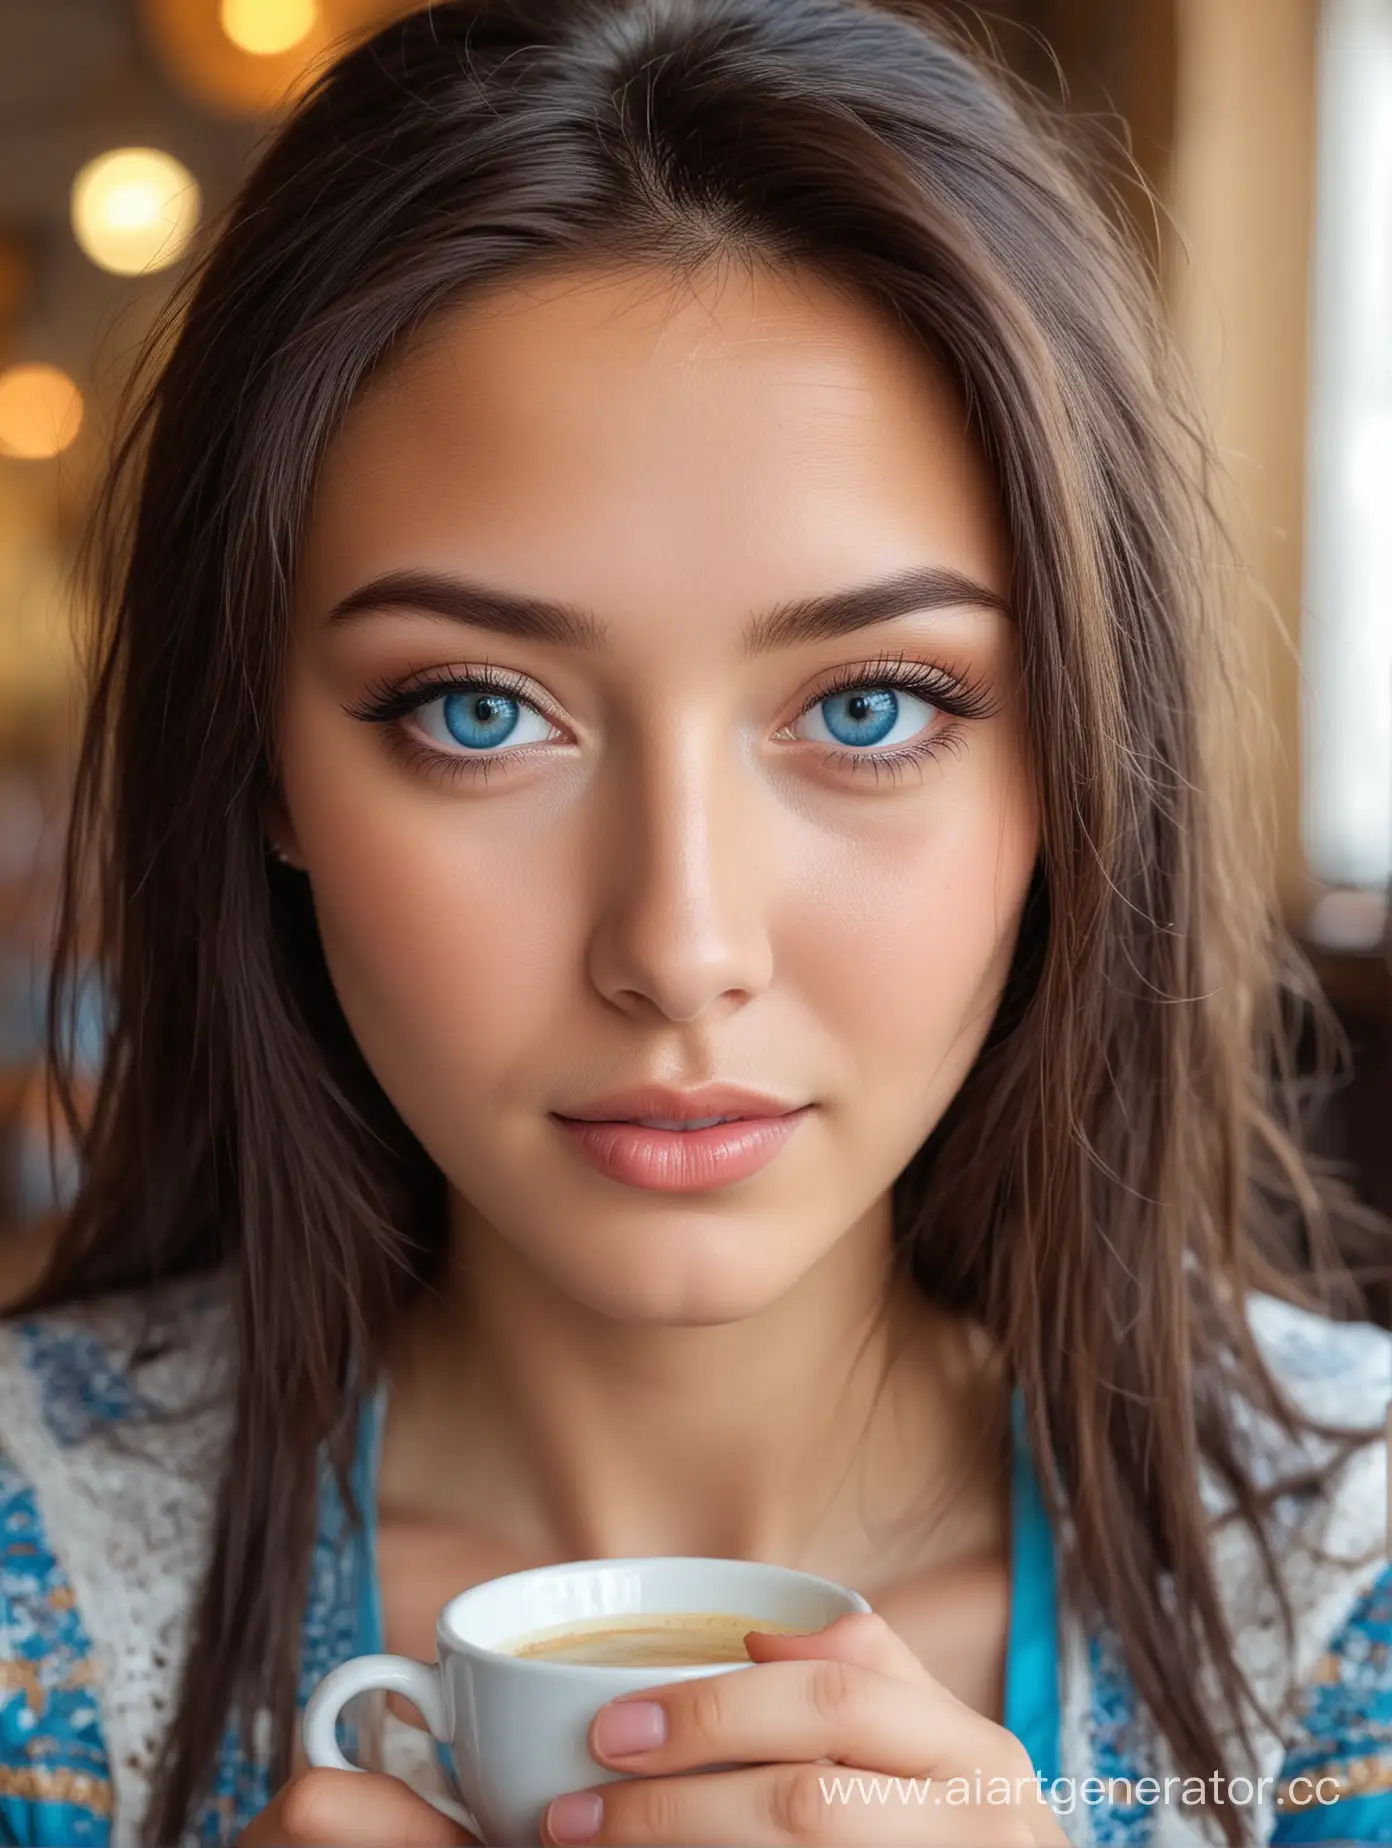 Stunning-Kazakh-Woman-with-Mesmerizing-Blue-Eyes-Enjoying-a-Relaxing-Moment-in-a-Cafe